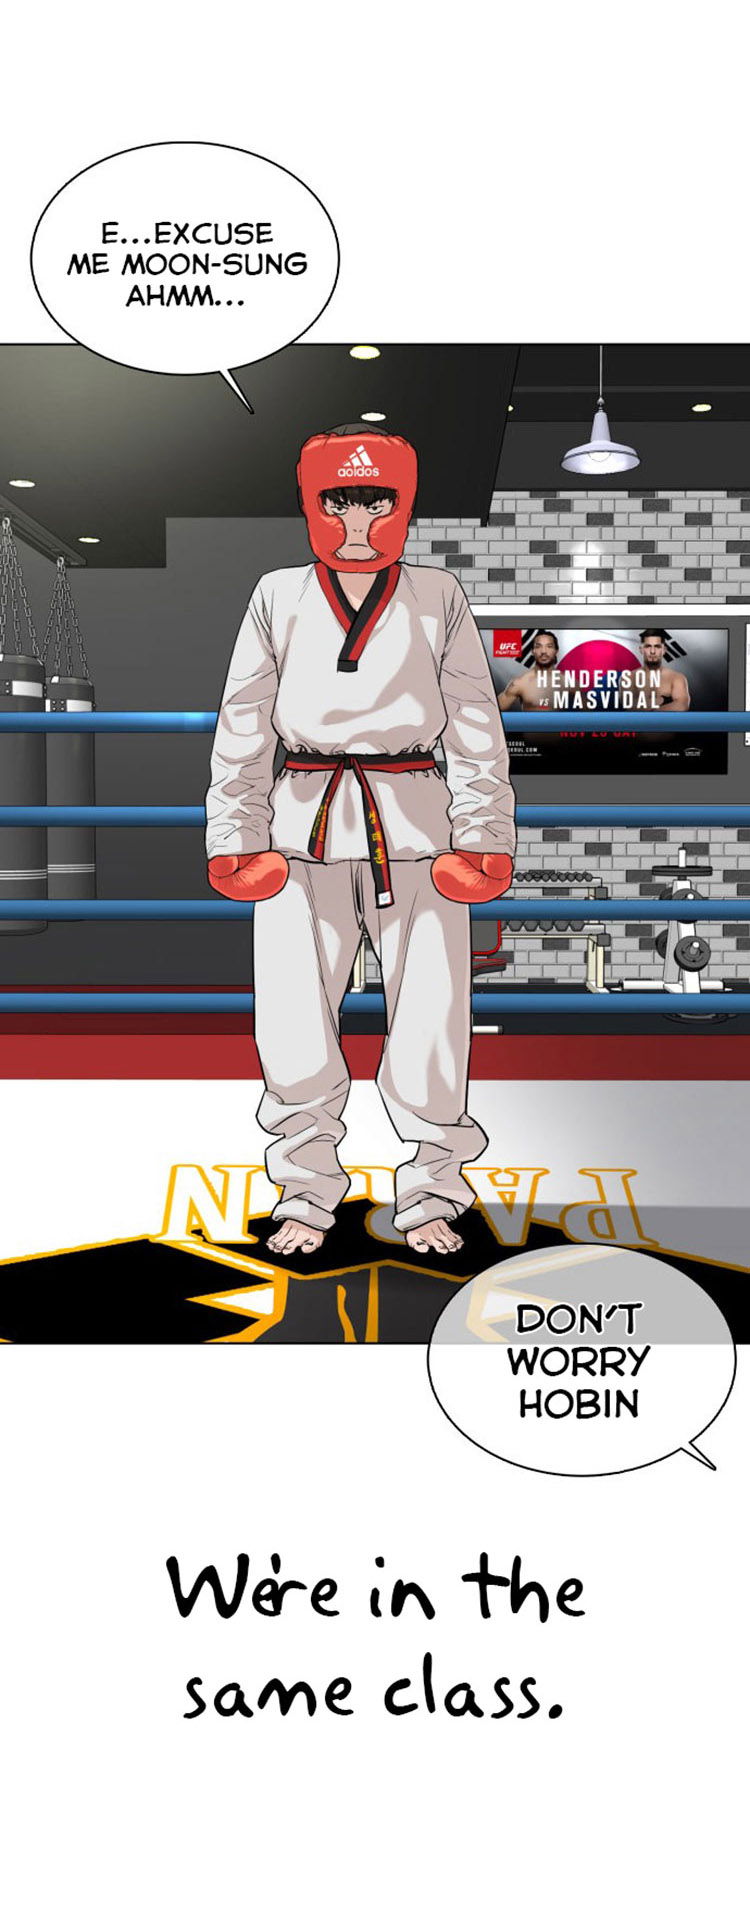 How To Fight Chapter 32  And Win Against Kickboxing page 14